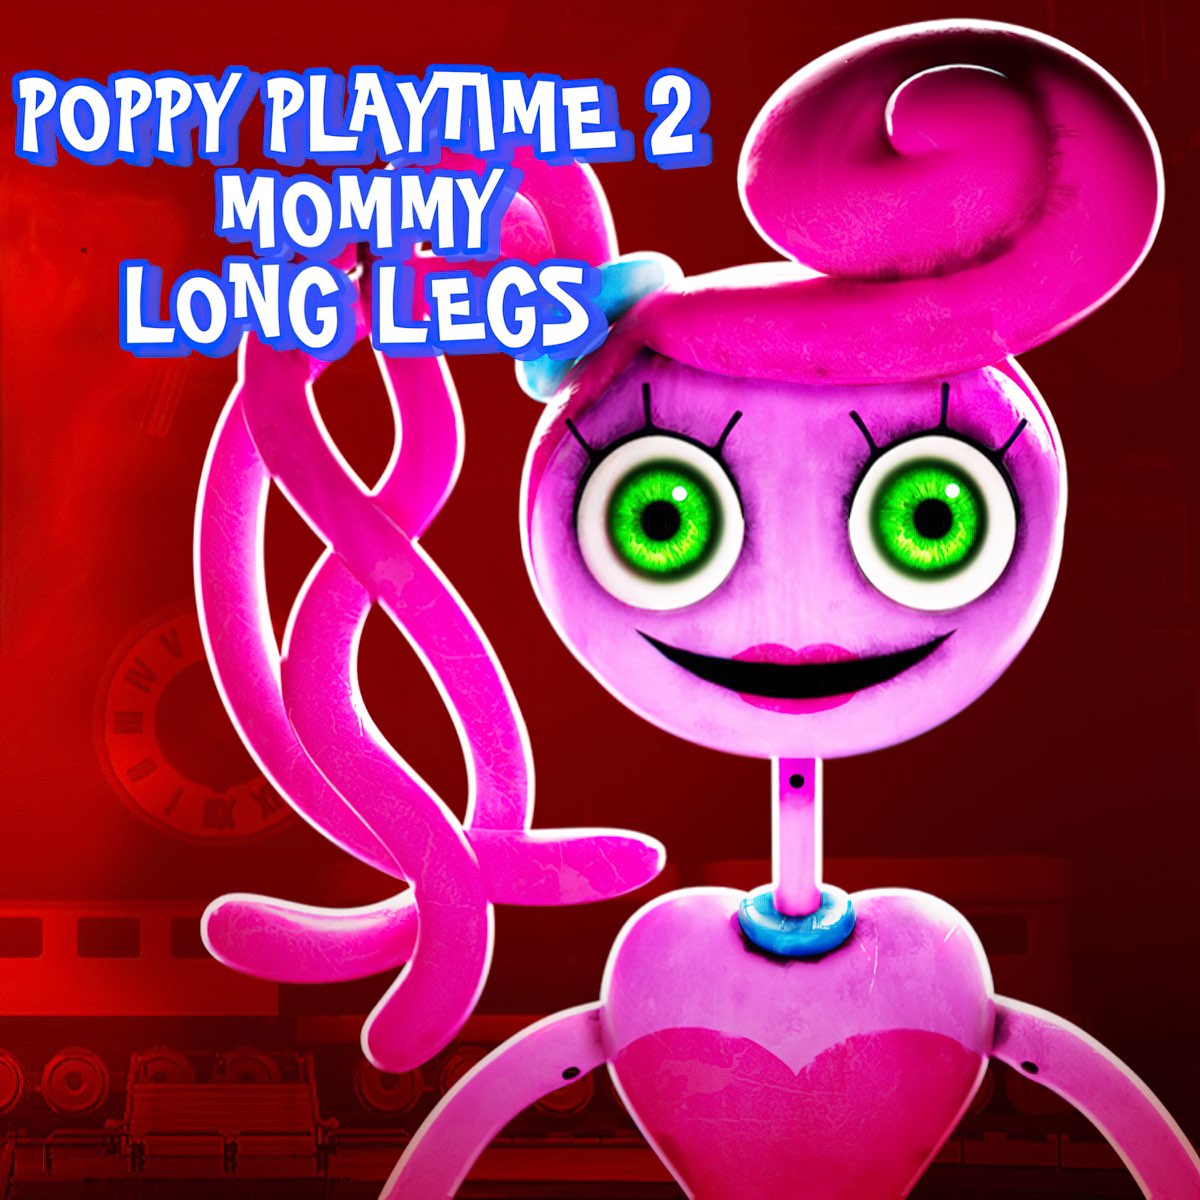 A MOMMY LONG LEGS CHEGOU, CORRA!!! (Poppy Playtime 2 Completo